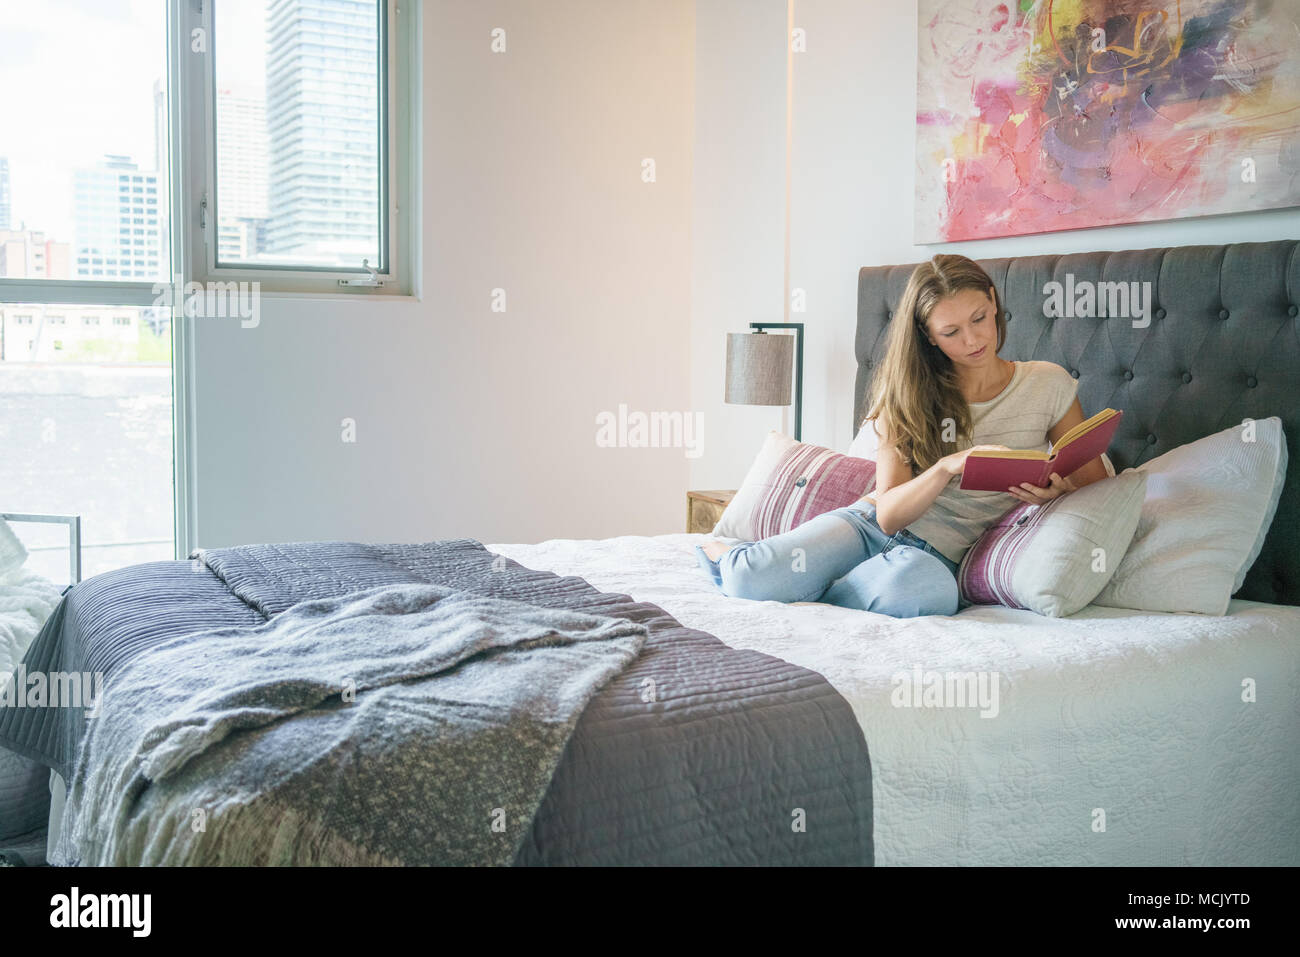 Relaxed young woman reading book in bed at home Stock Photo